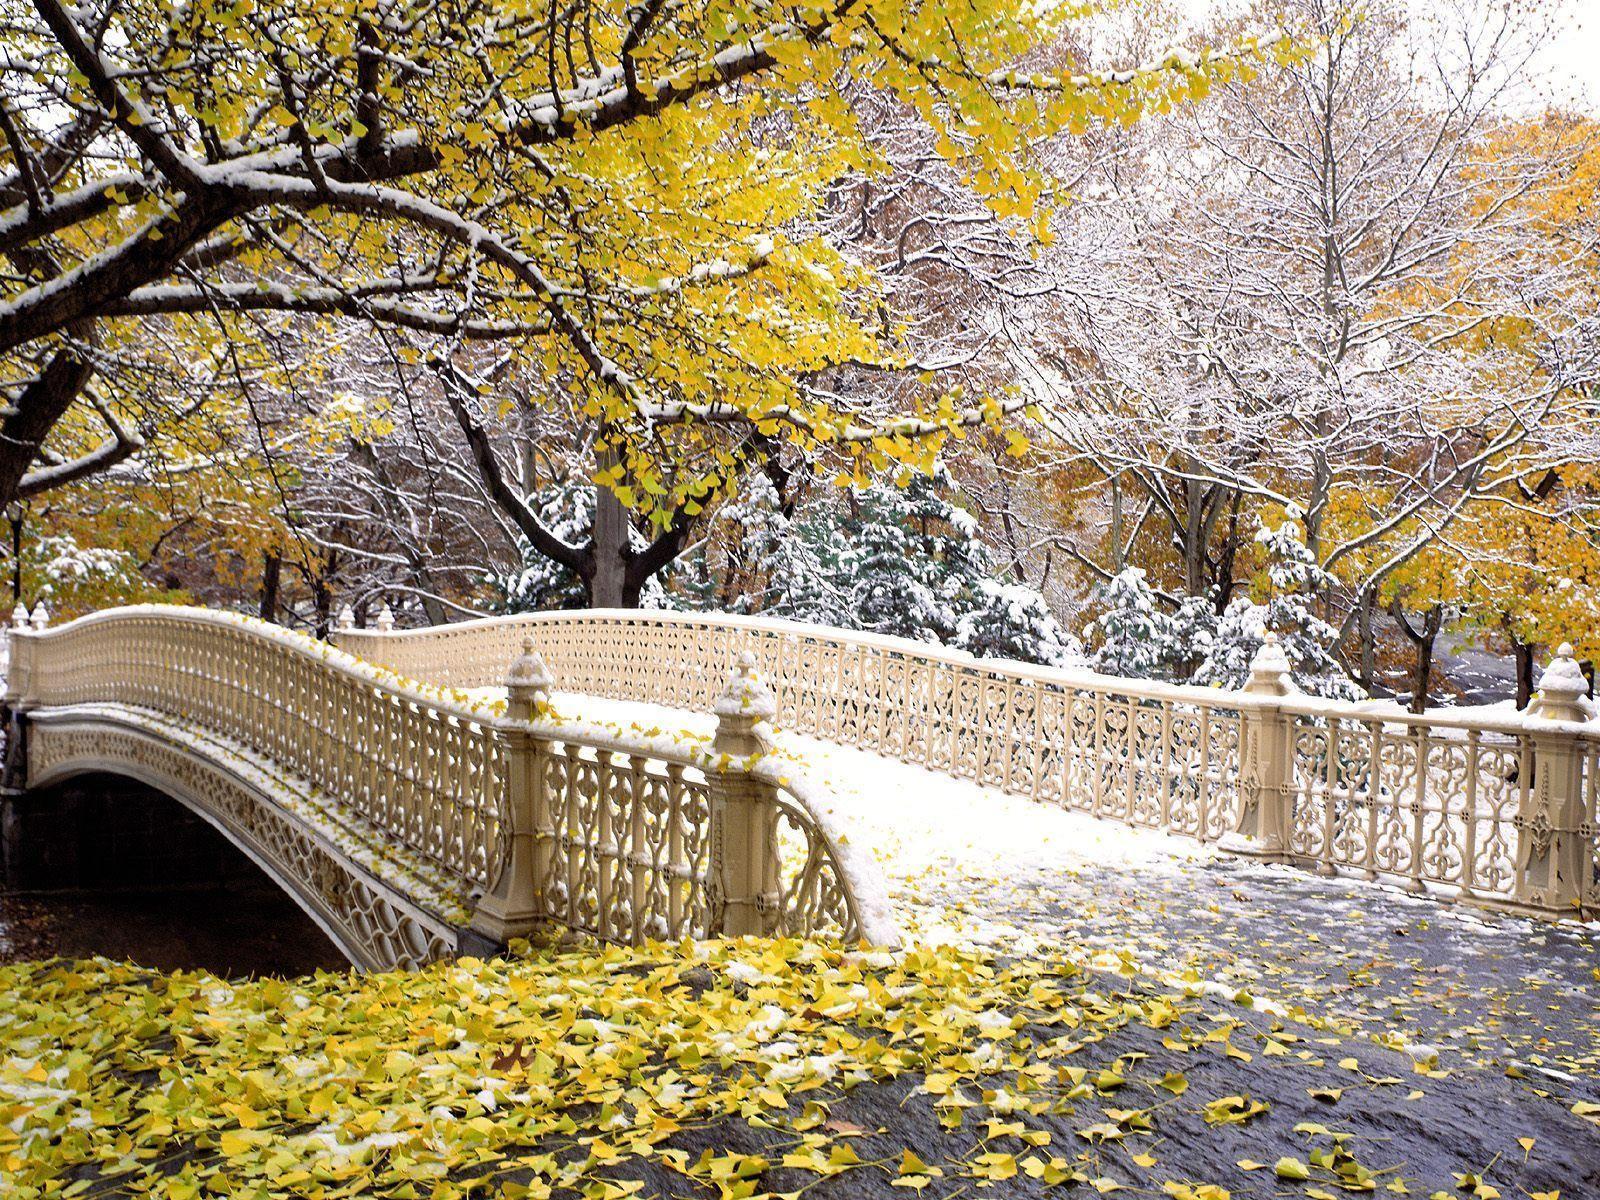 Central park of new york background Stock Free Image